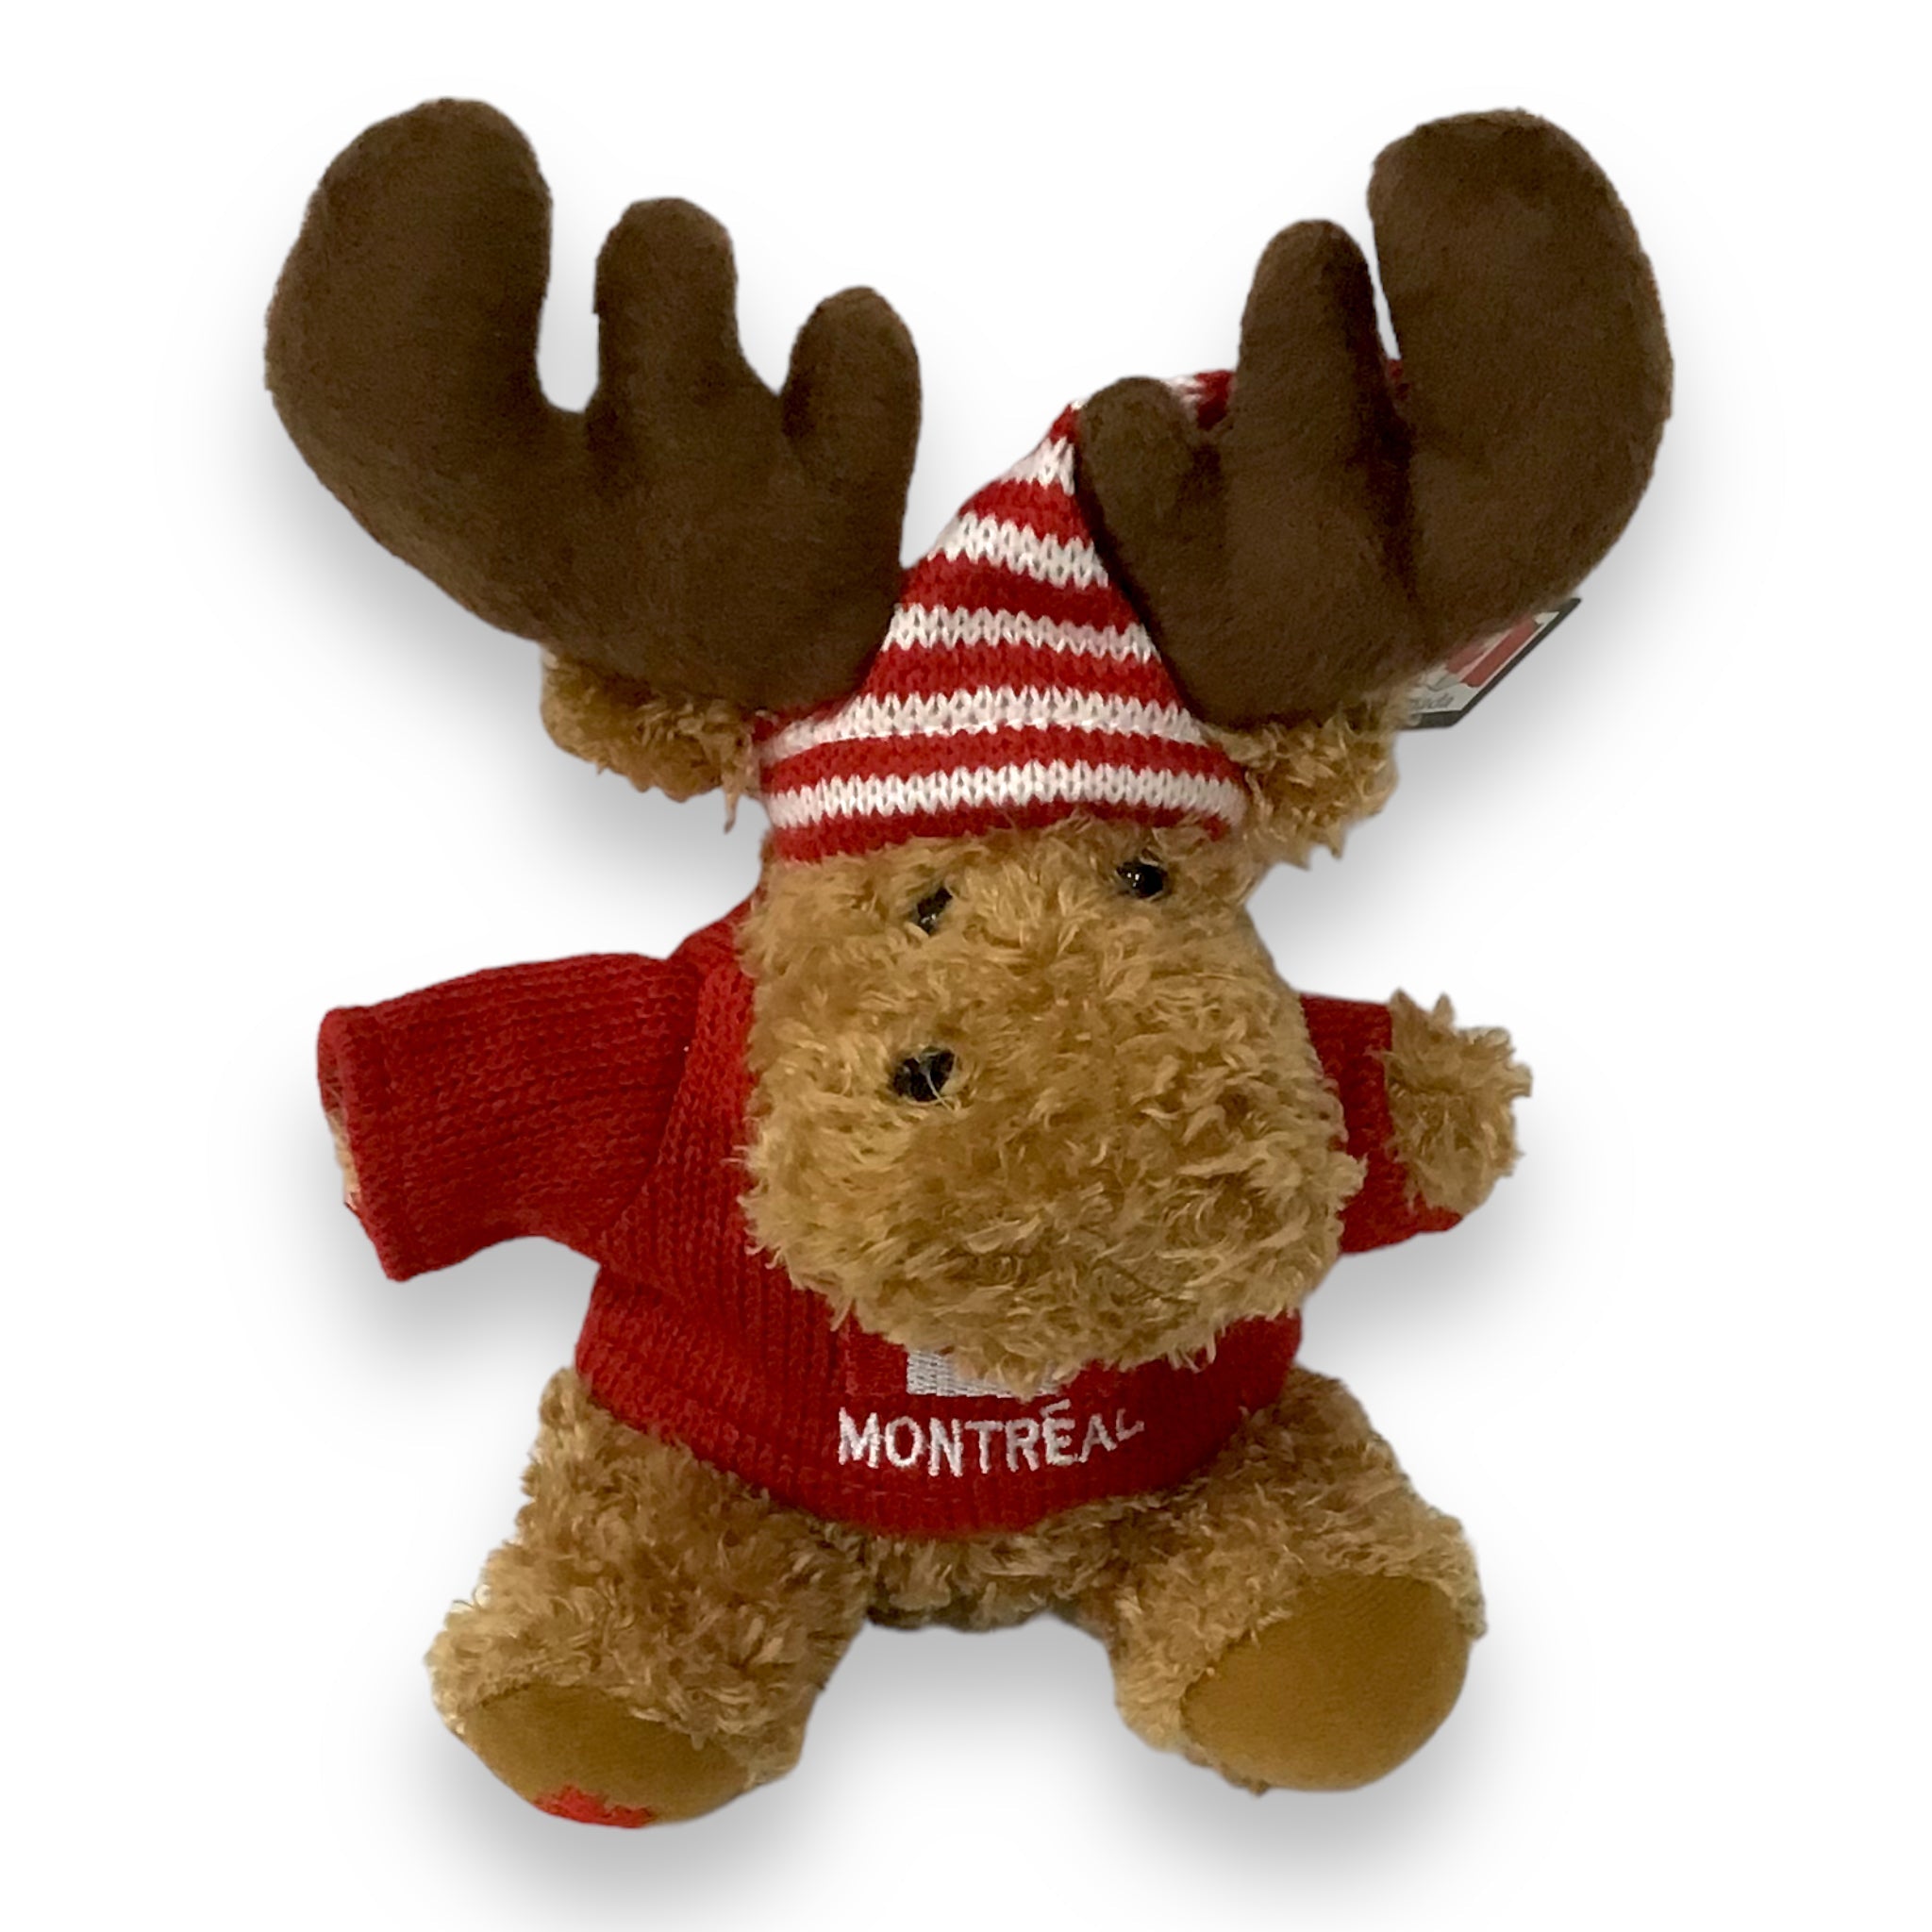 Montreal Stuffed Animal Moose 7 inches Plush with Red Hat & Sweater Canadian Flag Embroidery